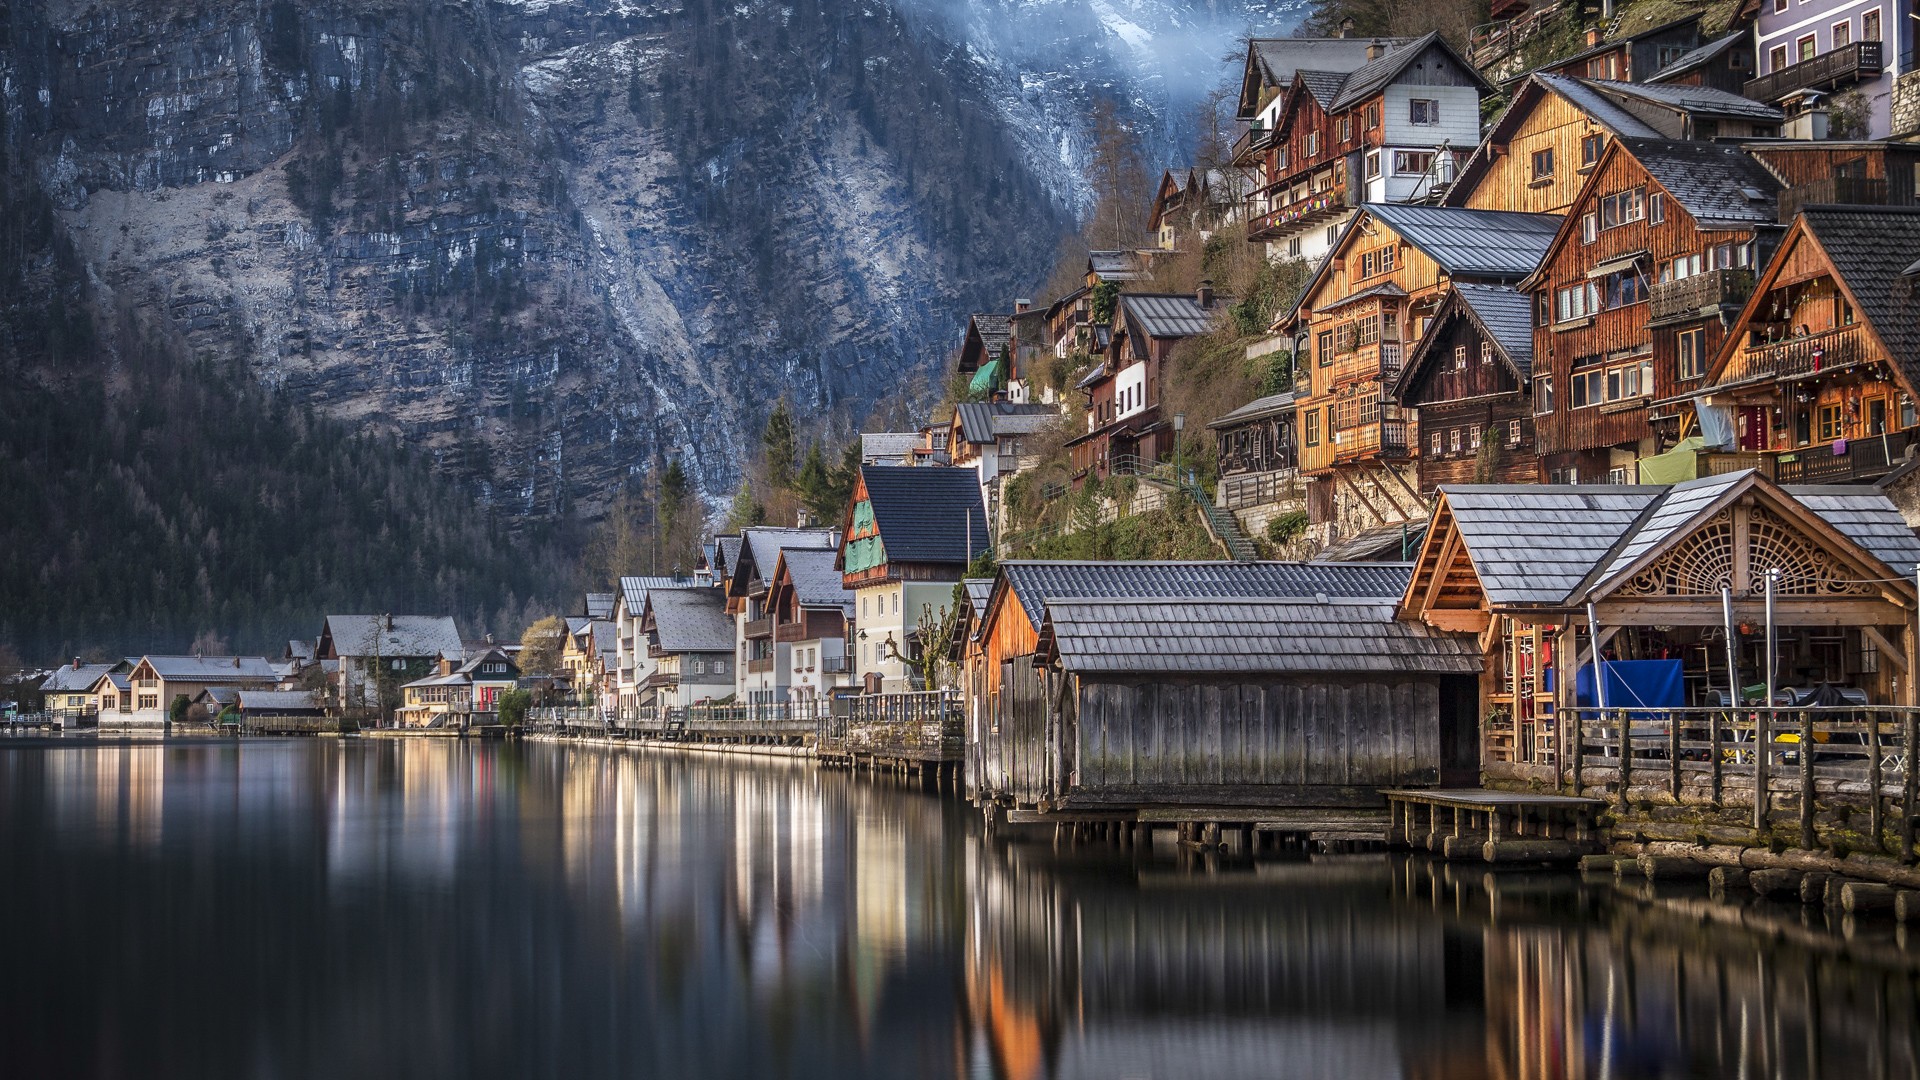 Houses built on a cliff by the lake